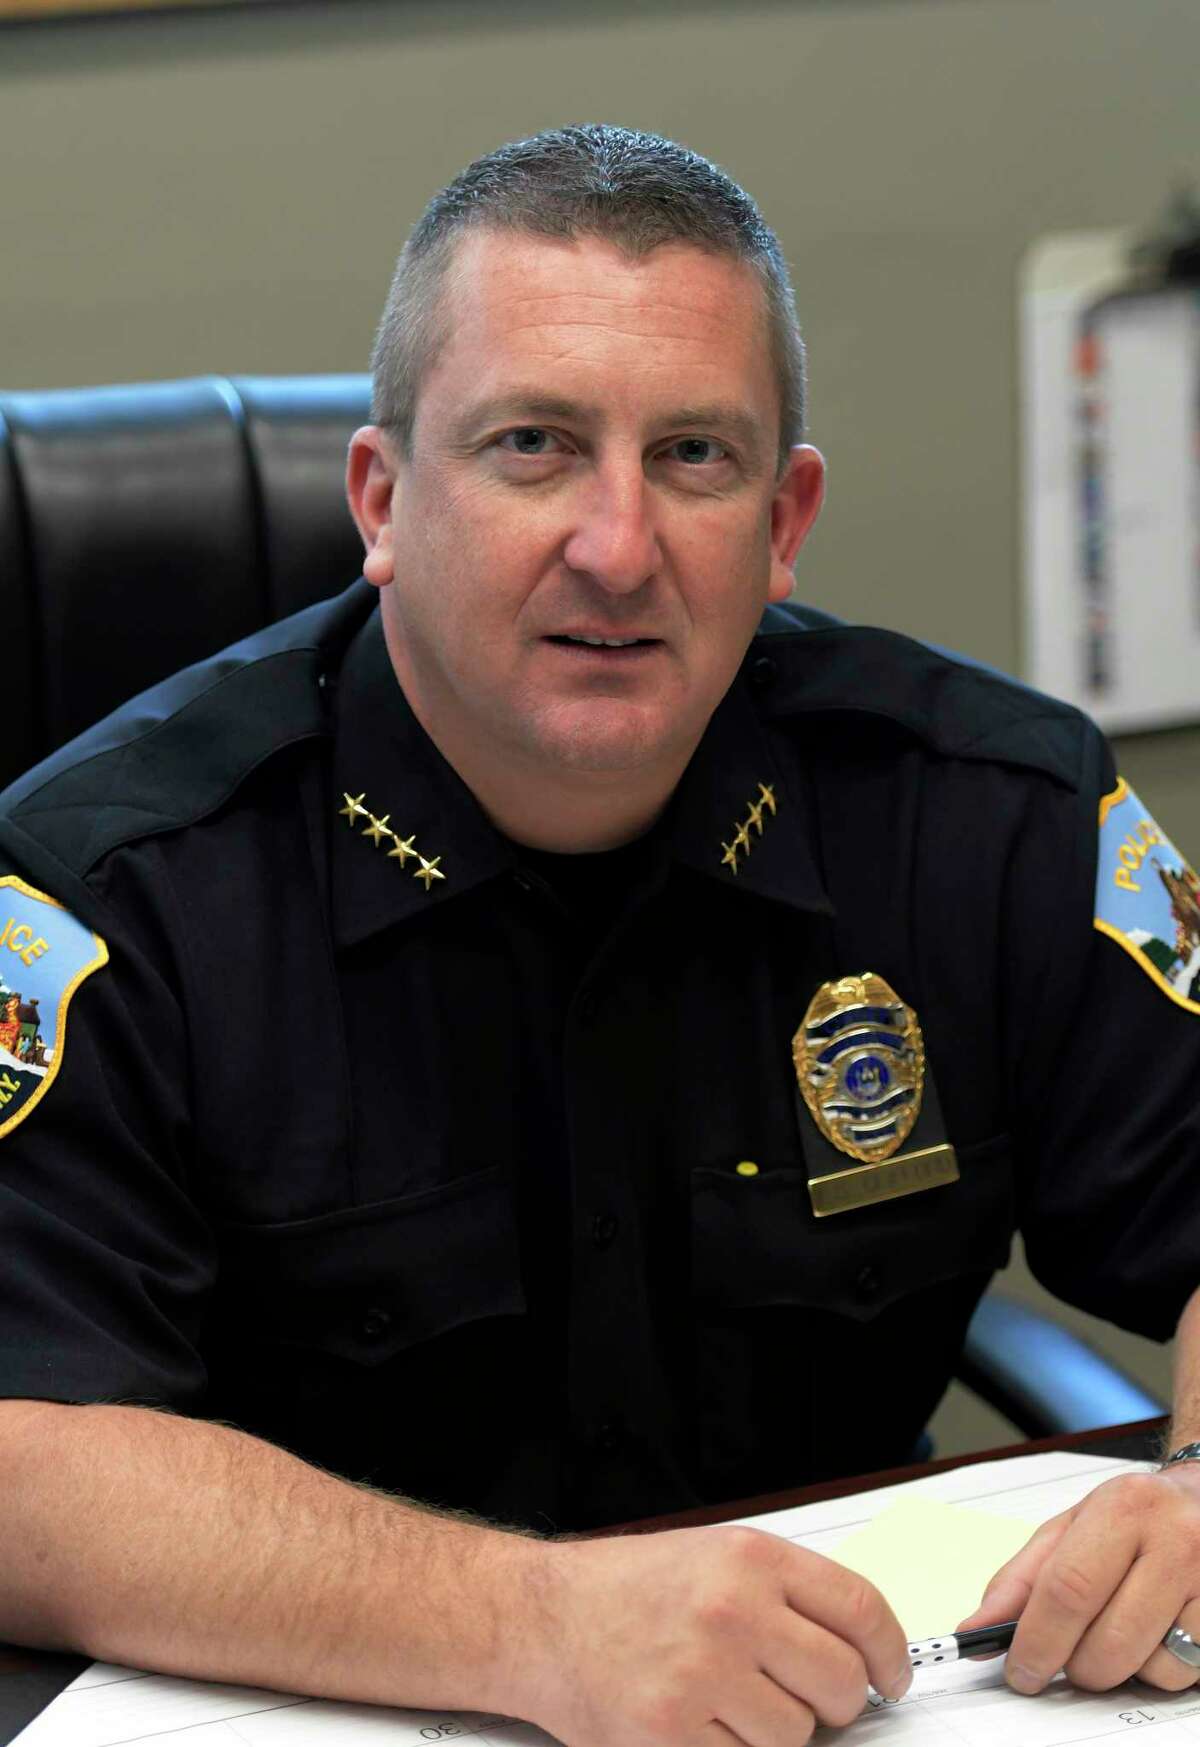 Schenectady Police Chief Eric Clifford, photographed in 2016, said he has "full confidence that the attorneys who represent the city and officers do so with the best interests of both in mind" when it comes to insurance payouts to settle lawsuits against his department, 